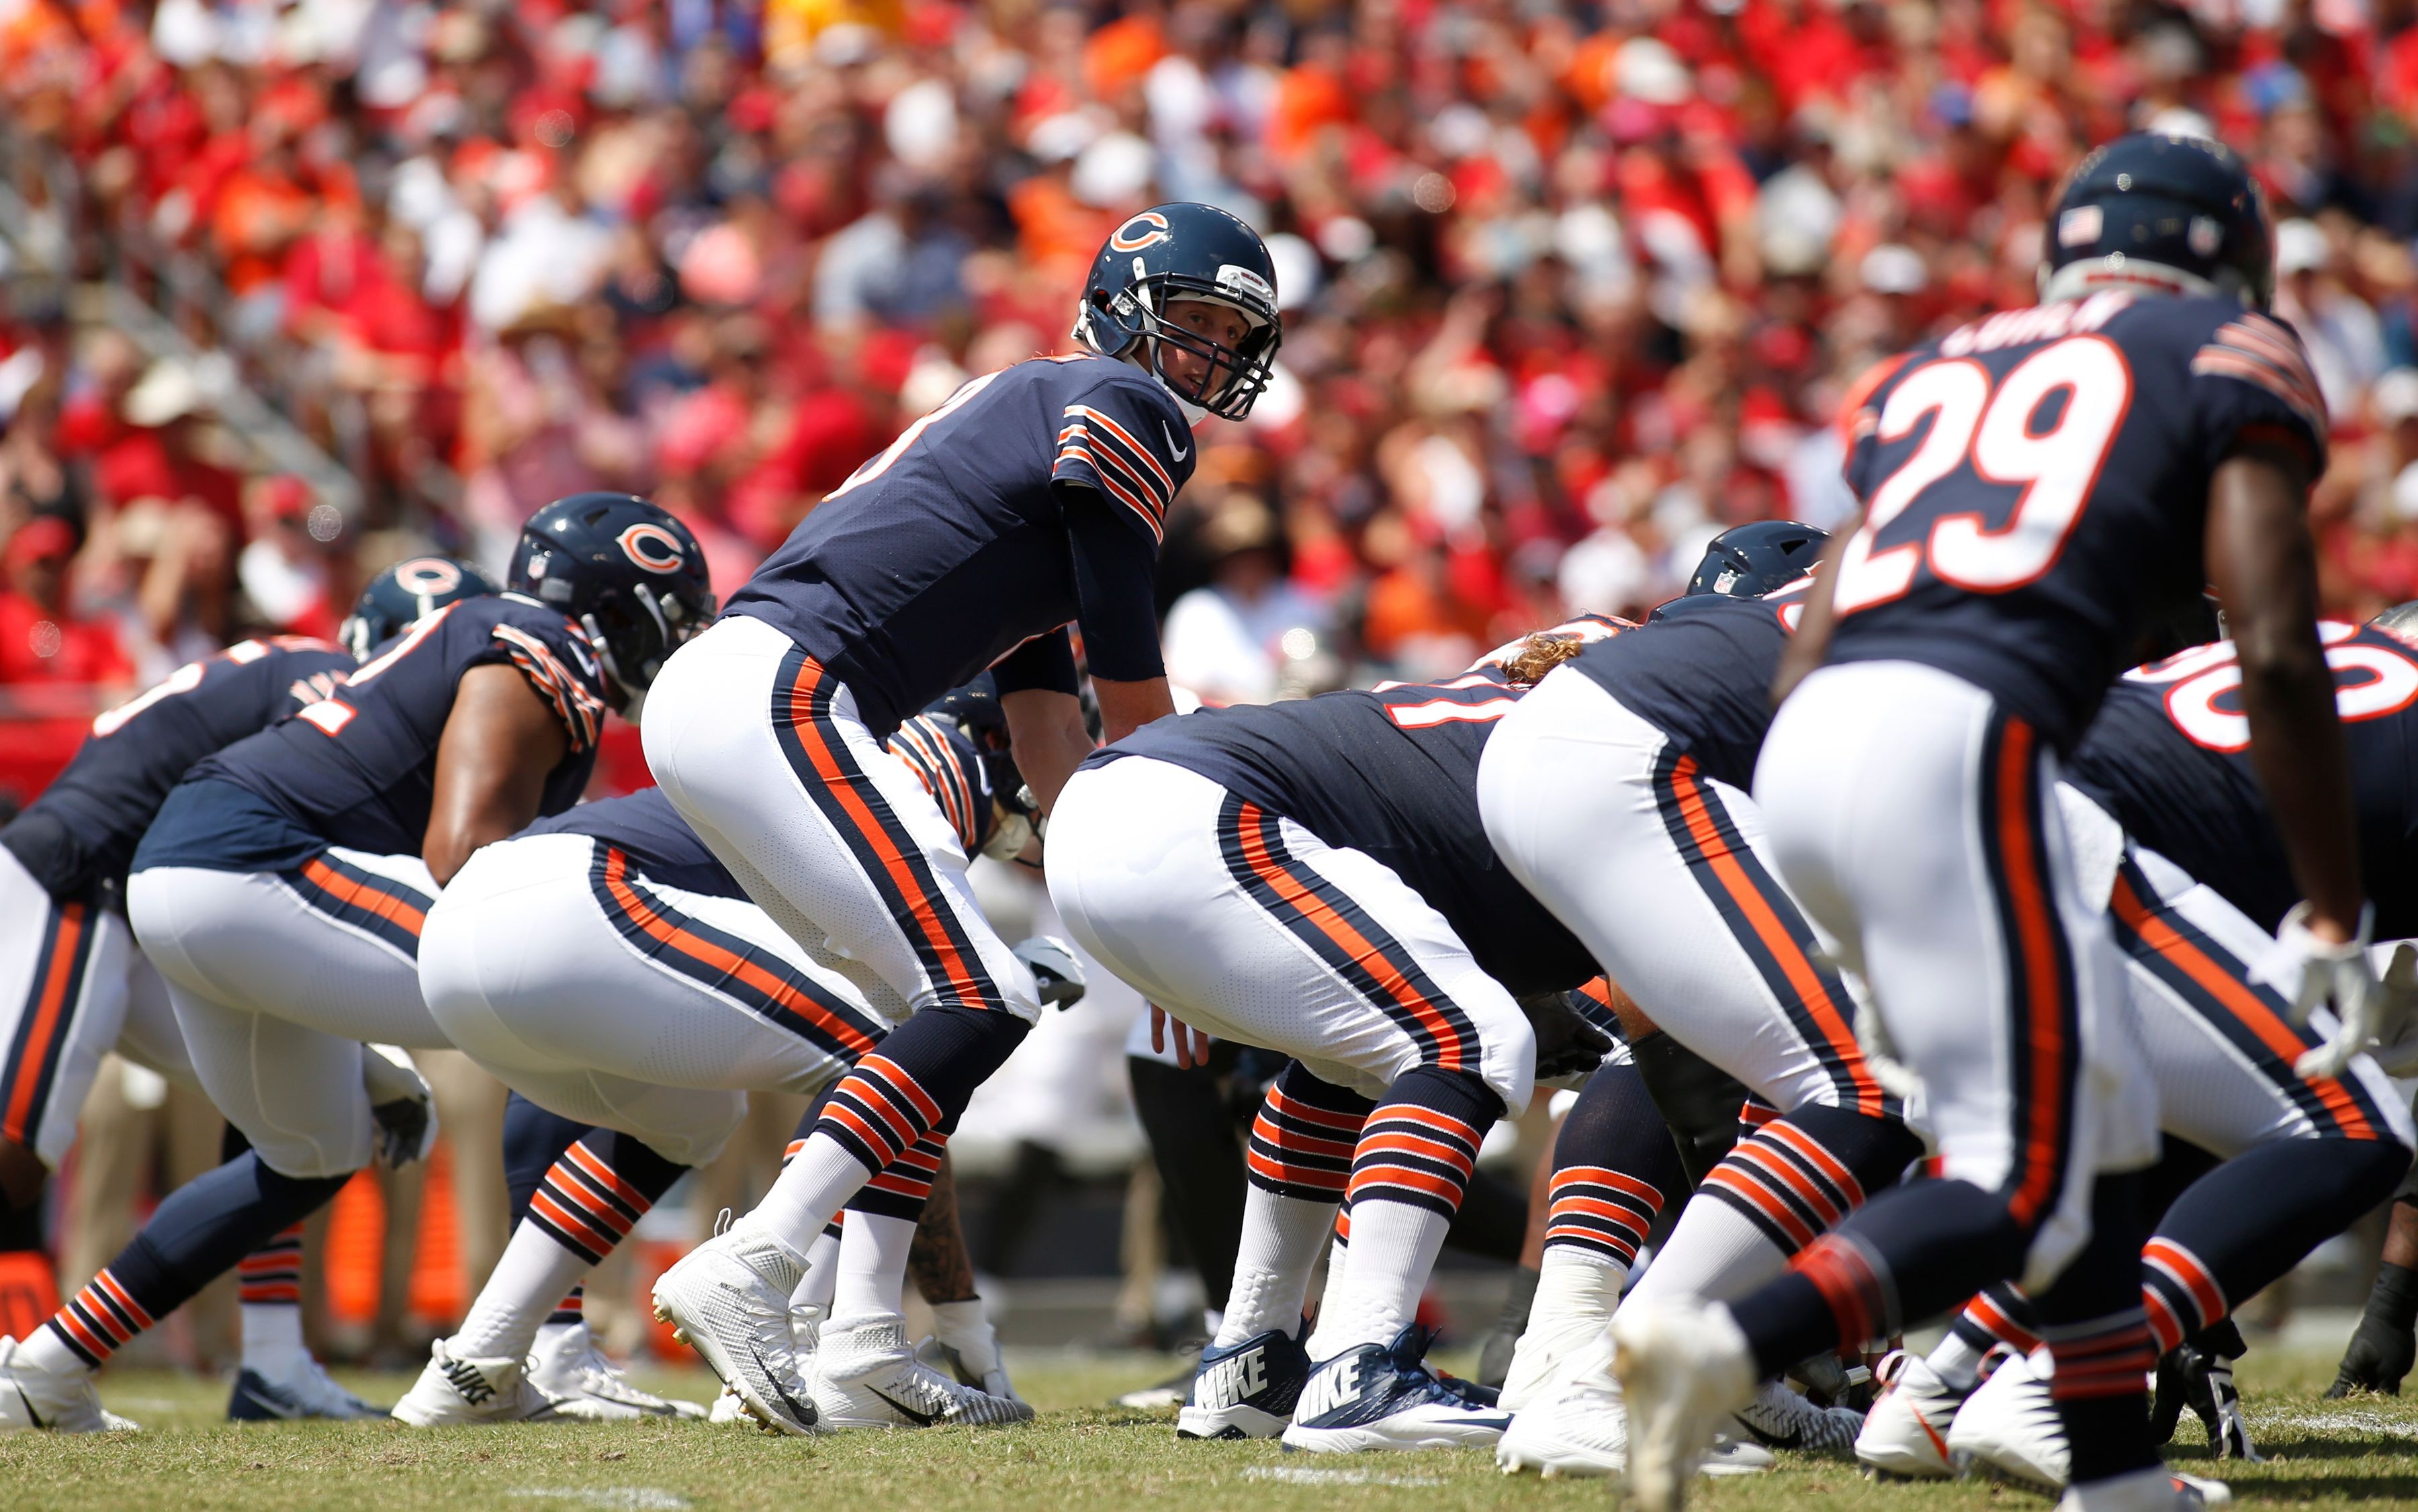 Chicago Bears Offensive linemen free agents to target in 2020